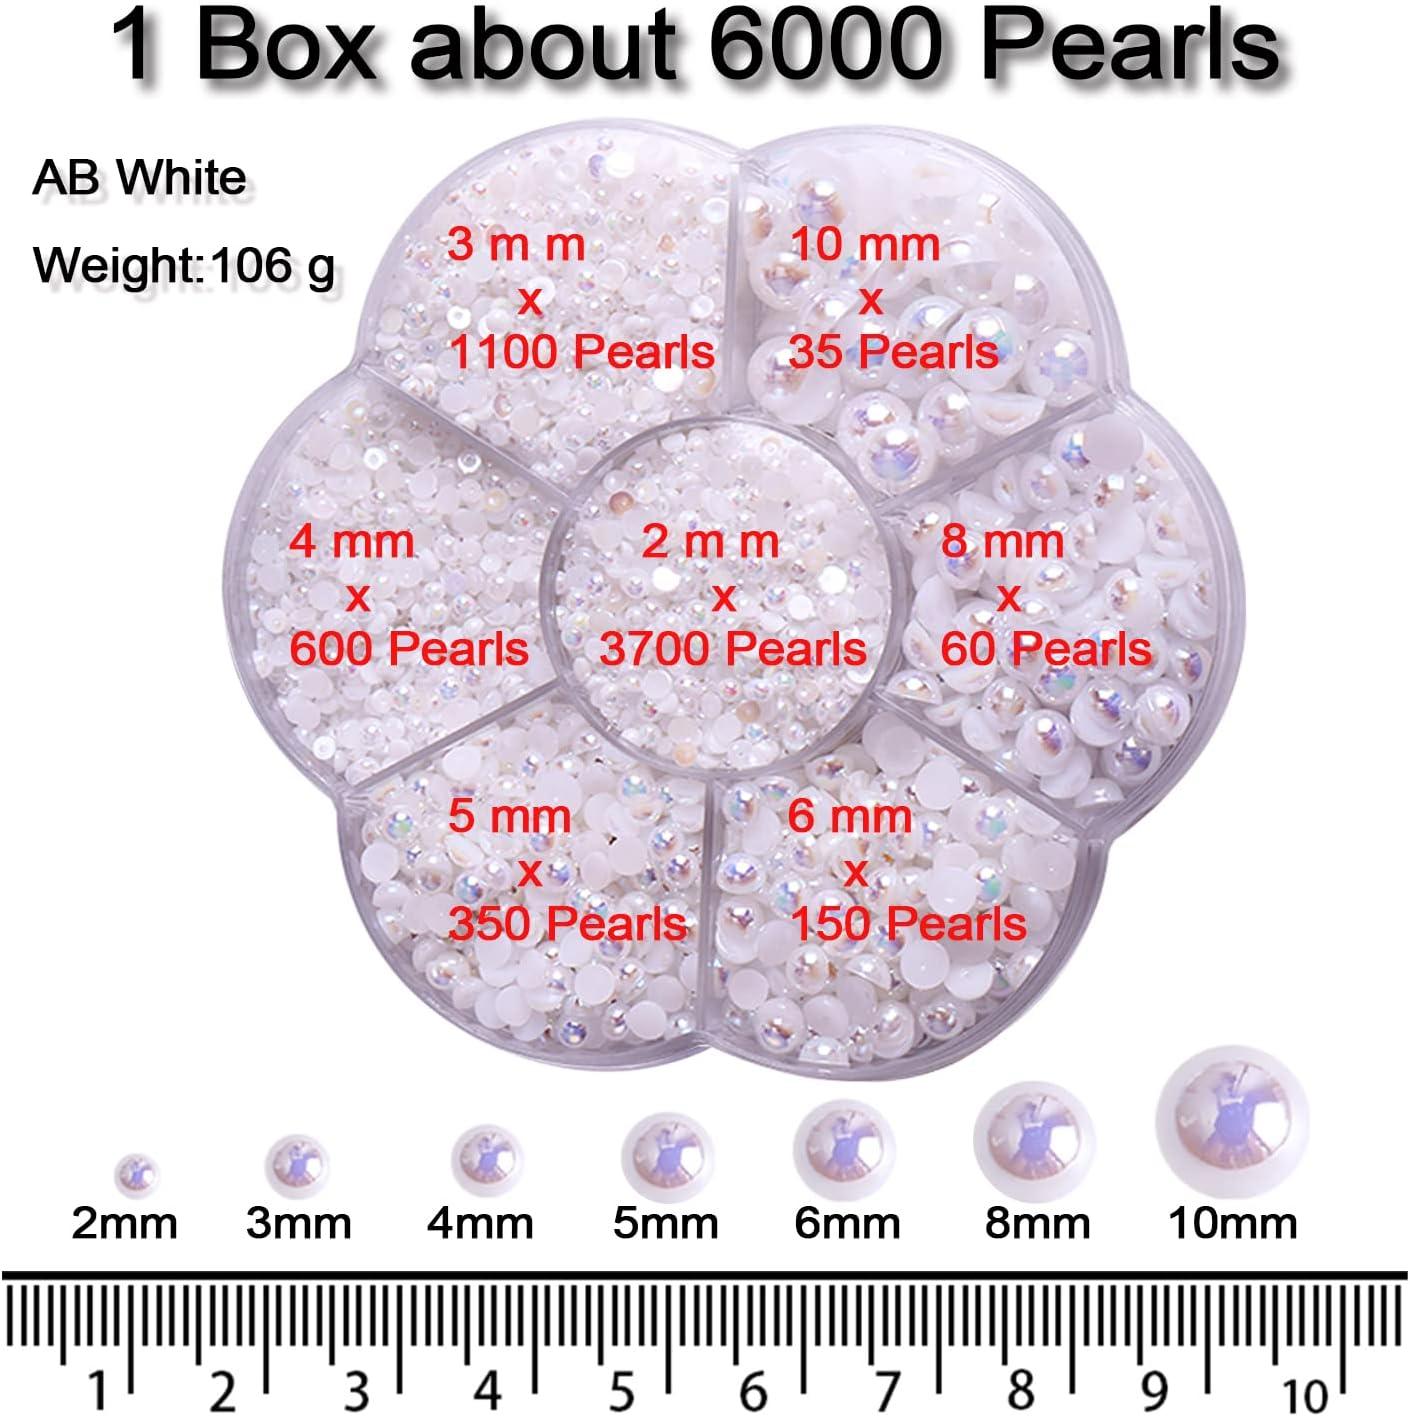 6000 Pcs Flatback Pearl,Half Pearls for Crafts, Nail Pearls for Nails Art,  Flatback Pearls Gems for Makeup. Neatly Organized AB White Pearls for  Artists Creative. Available in 7 Sizes:2/3/4/5/6/8/10mm